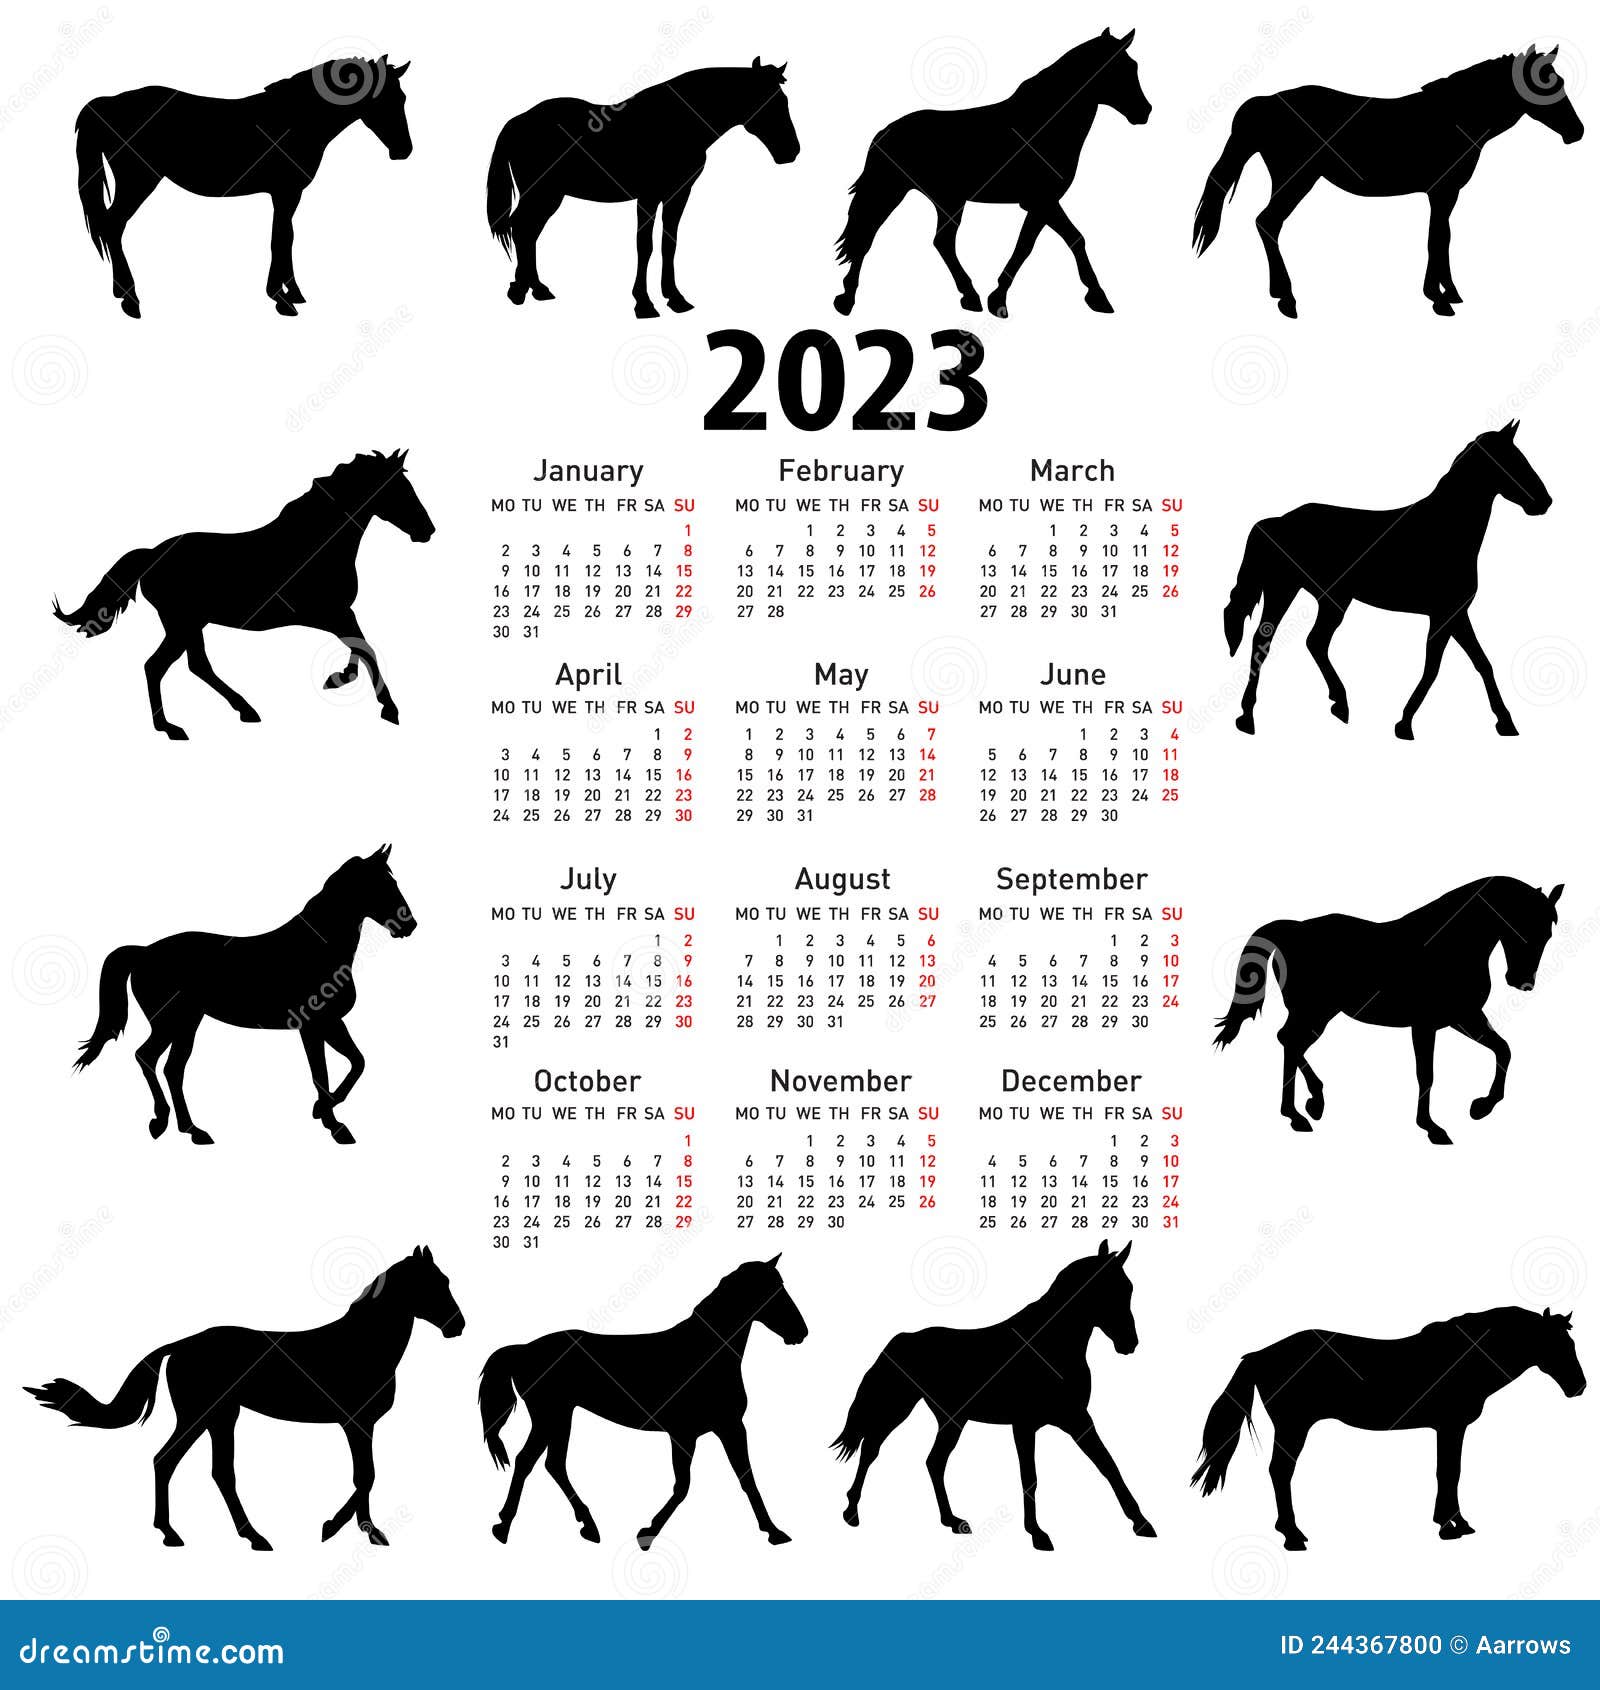 Calendar for 2023 of Horse Silhouettes Isolated on White Background